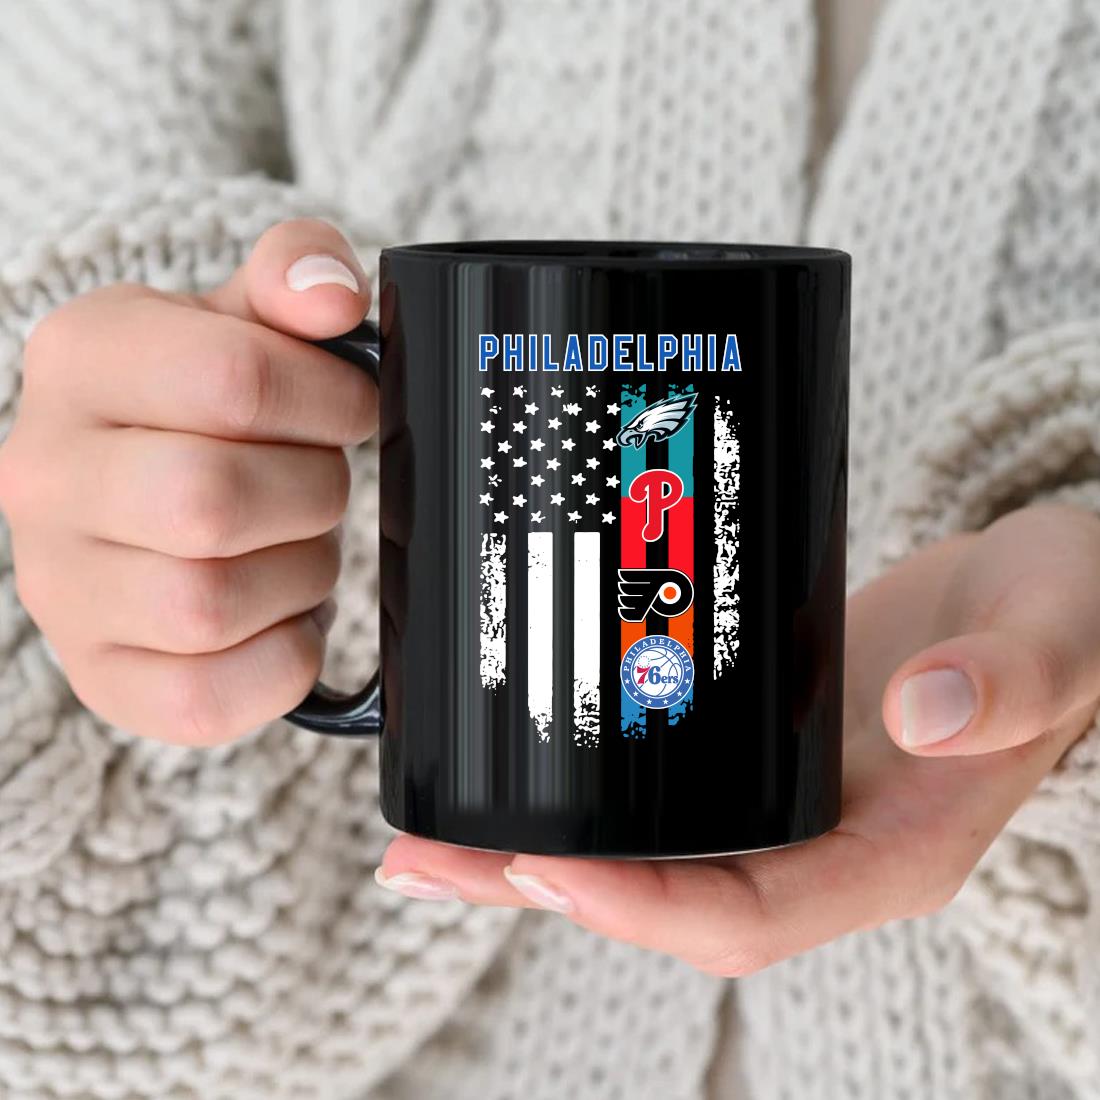 Eagles Mug Heart 76ers Flyers Phillies Philadelphia Eagles Gift -  Personalized Gifts: Family, Sports, Occasions, Trending